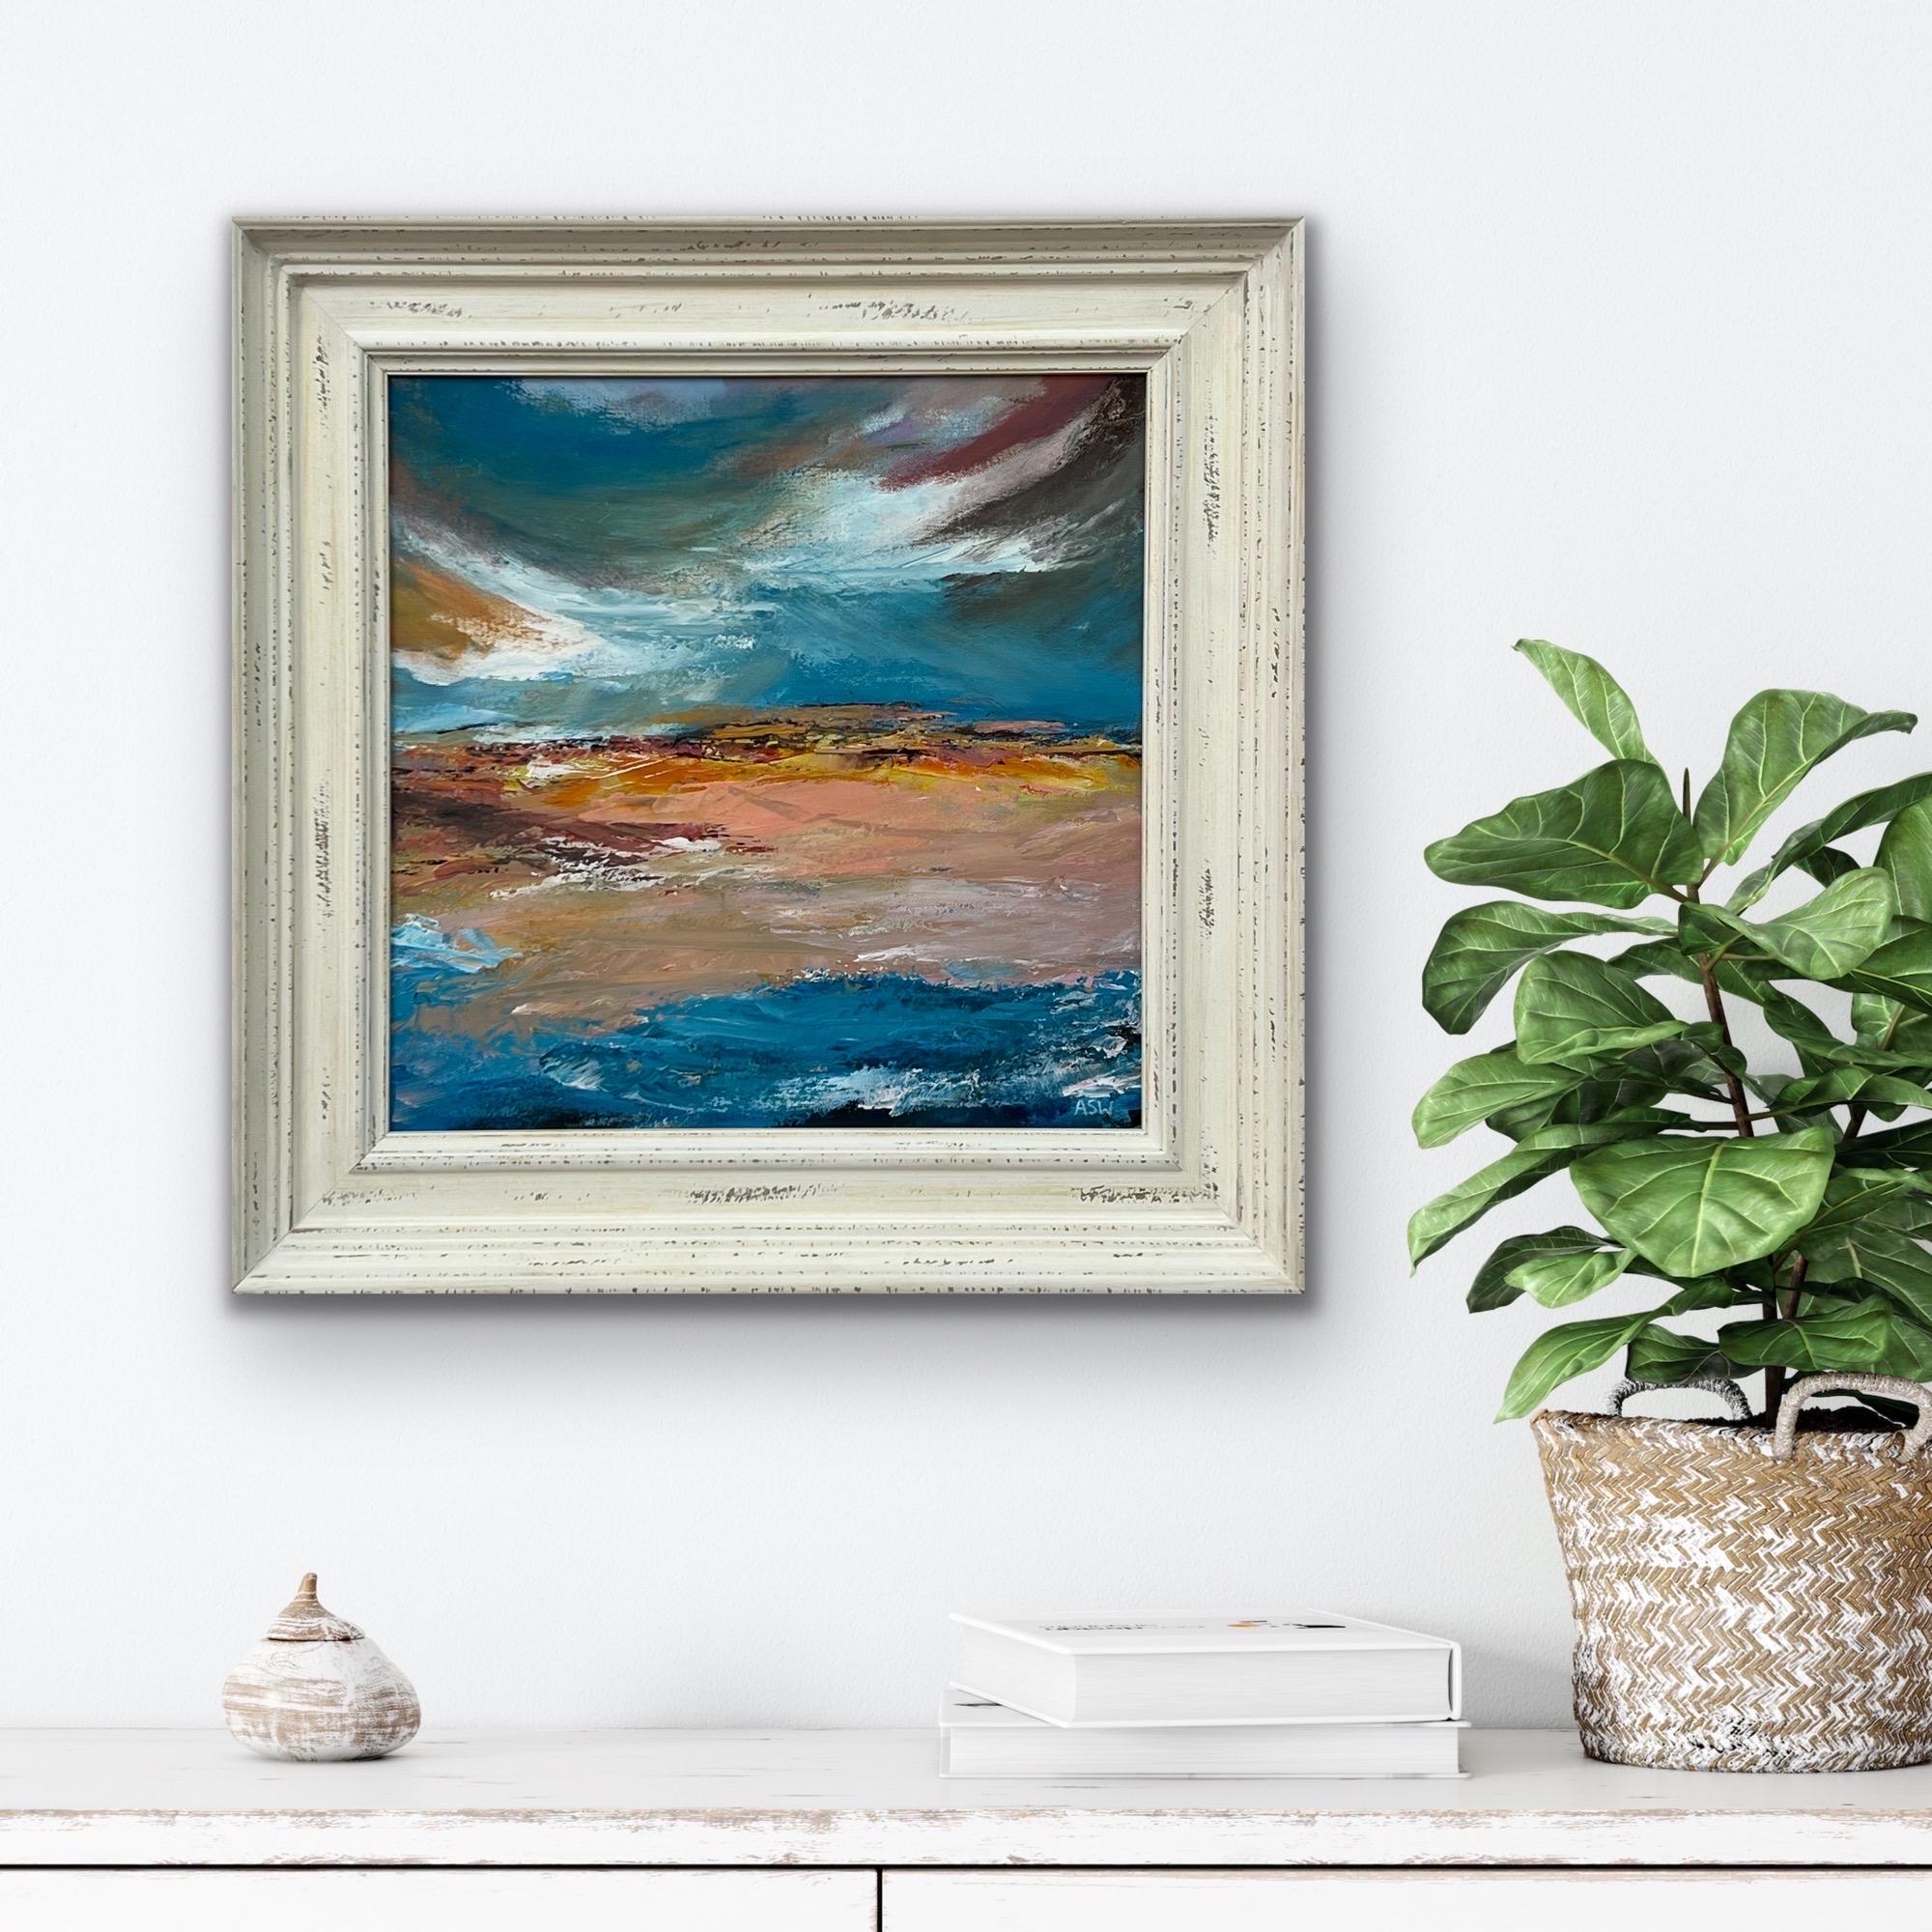 Expressive Abstract Seascape Landscape Painting by Contemporary British Artist For Sale 1